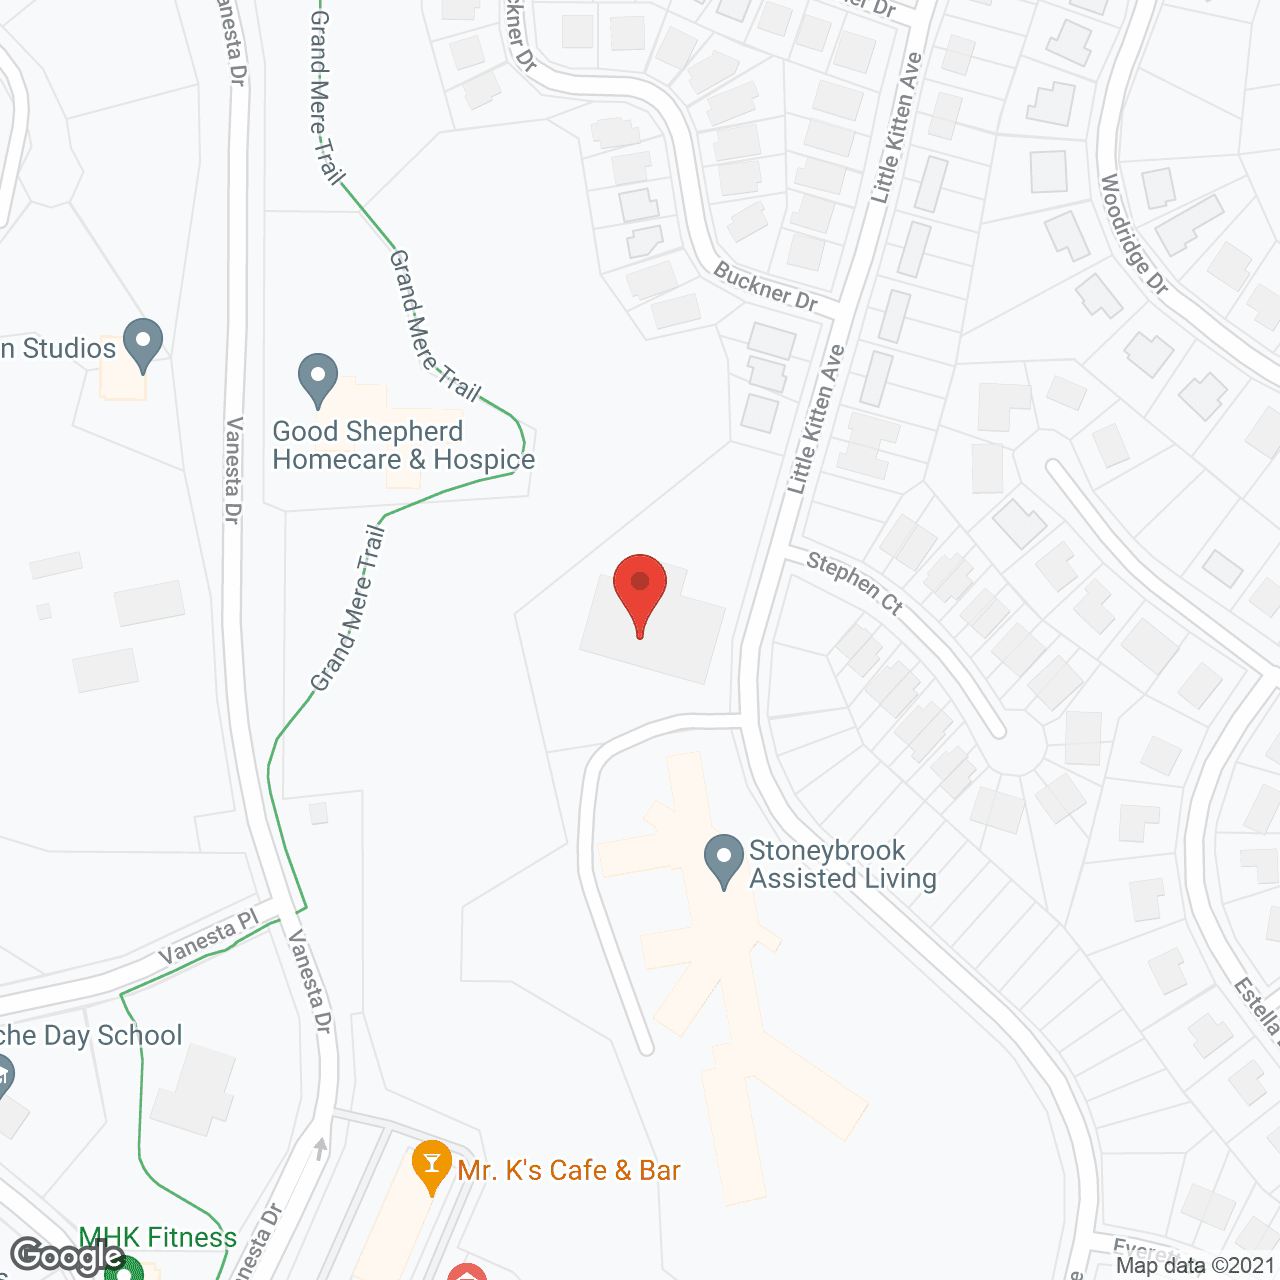 Stoneybrook Assisted Living in google map